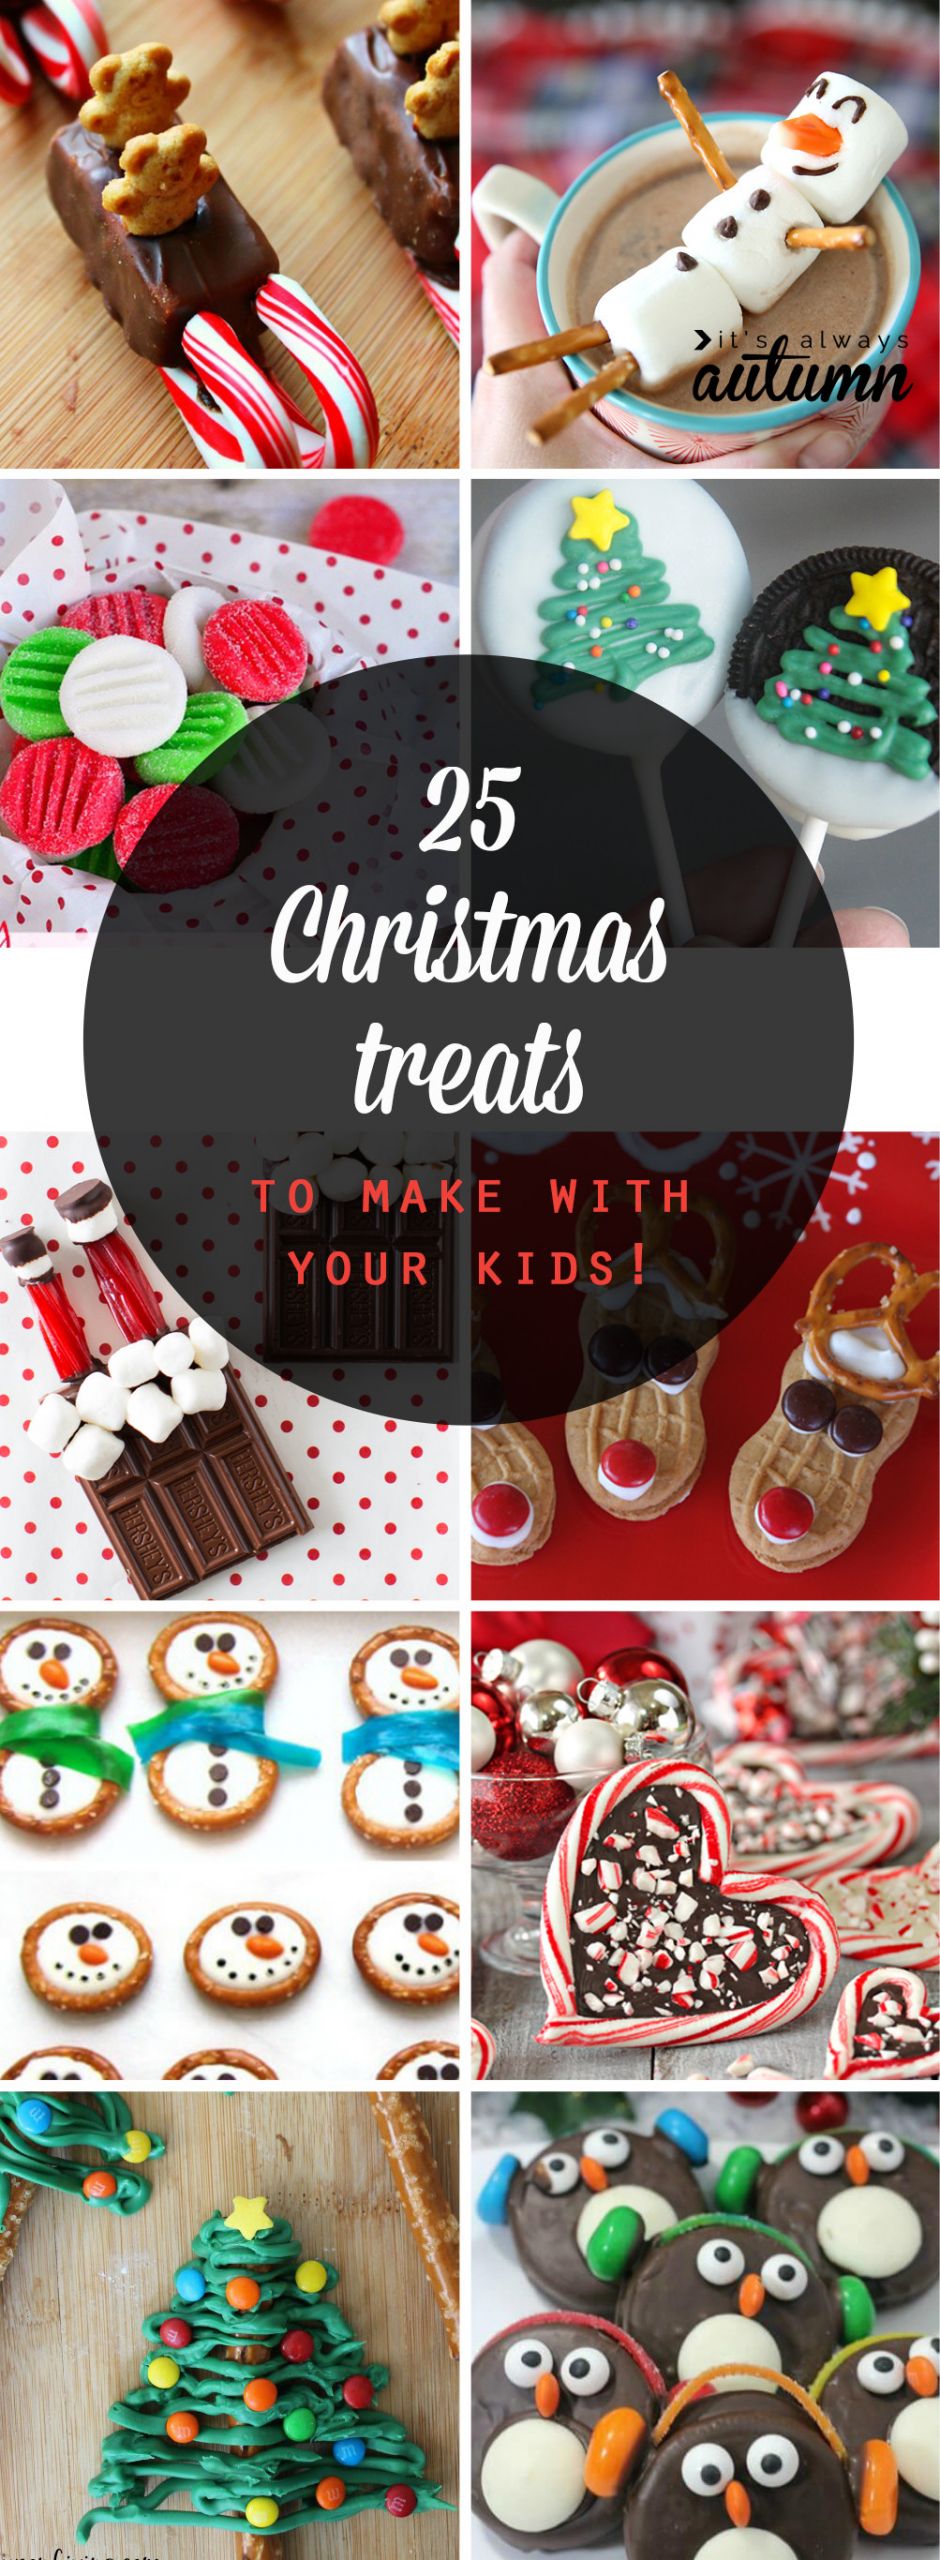 Amazing Christmas Gifts For Kids
 25 adorable Christmas treats to make with your kids It s